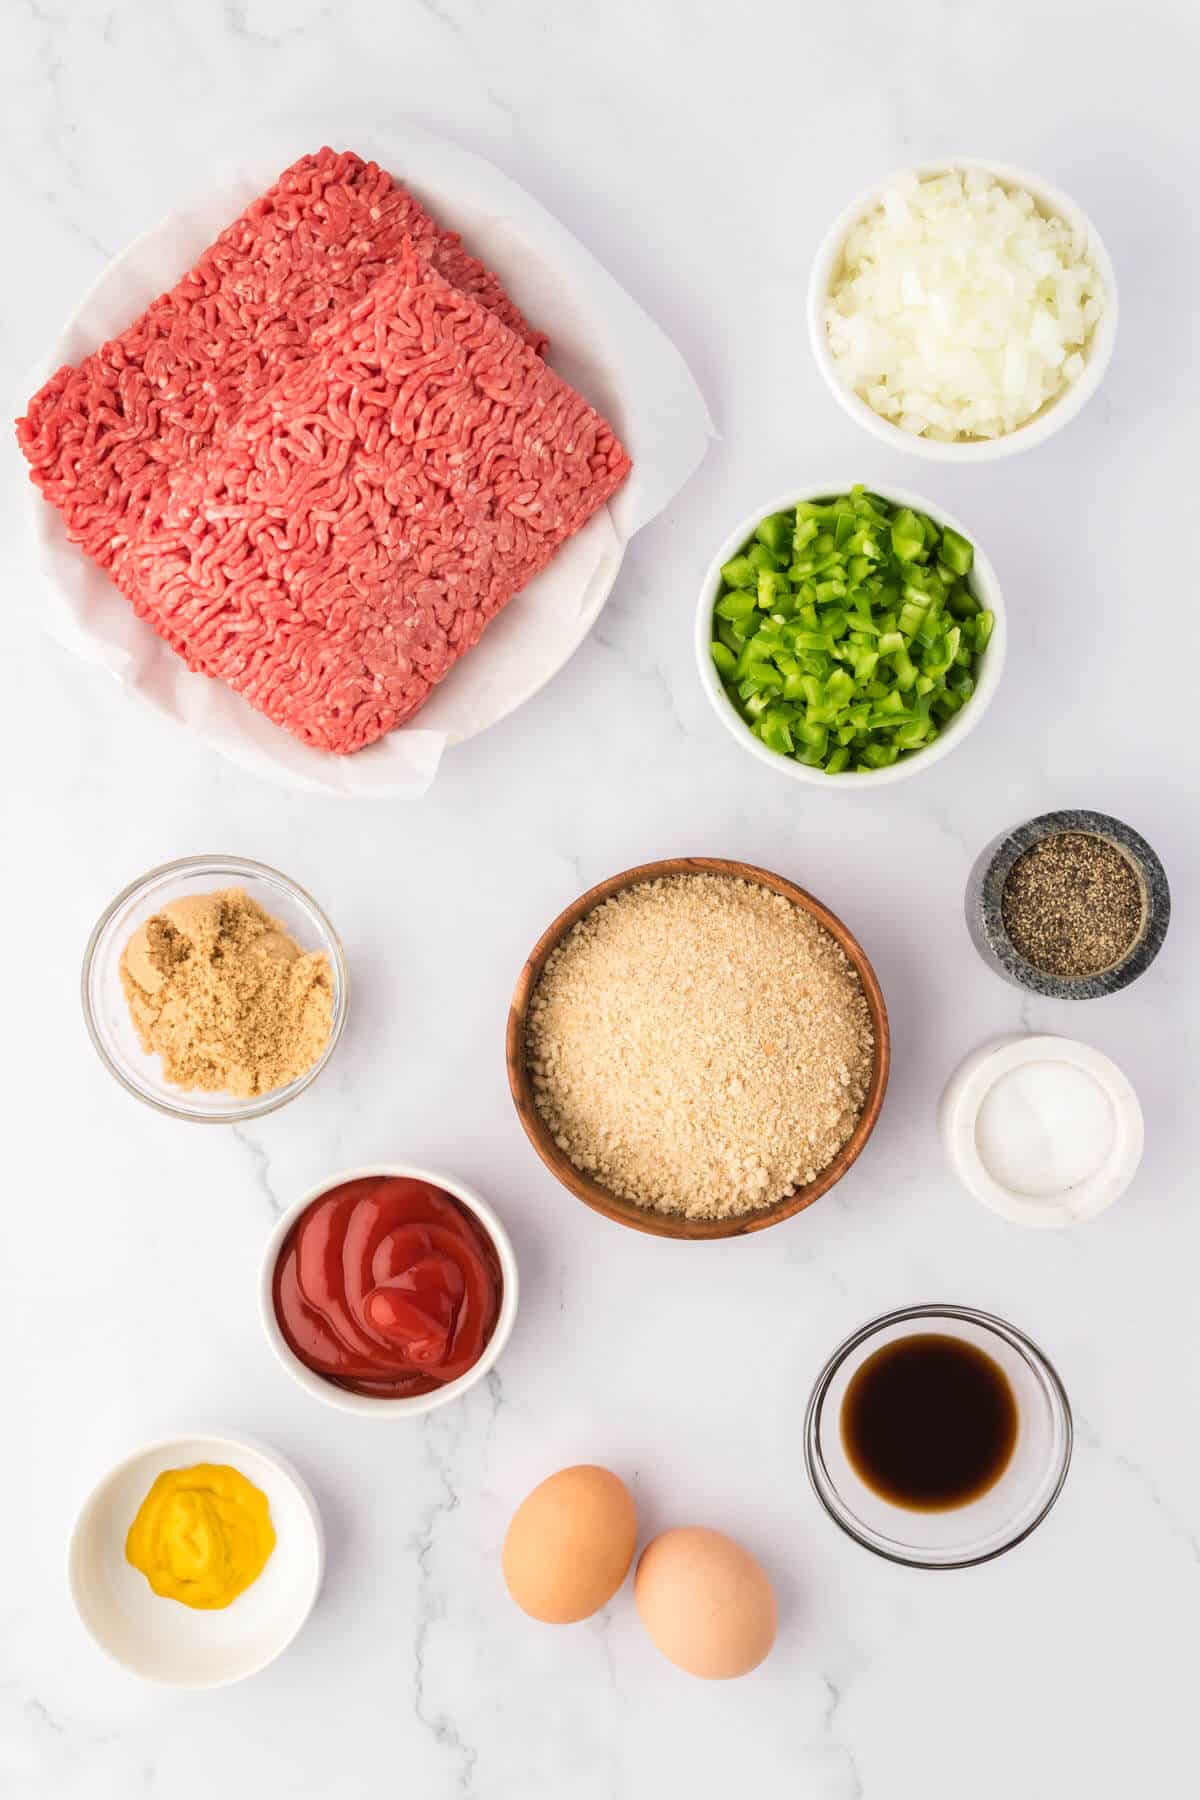 Ingredients to make the meatloaf recipe.